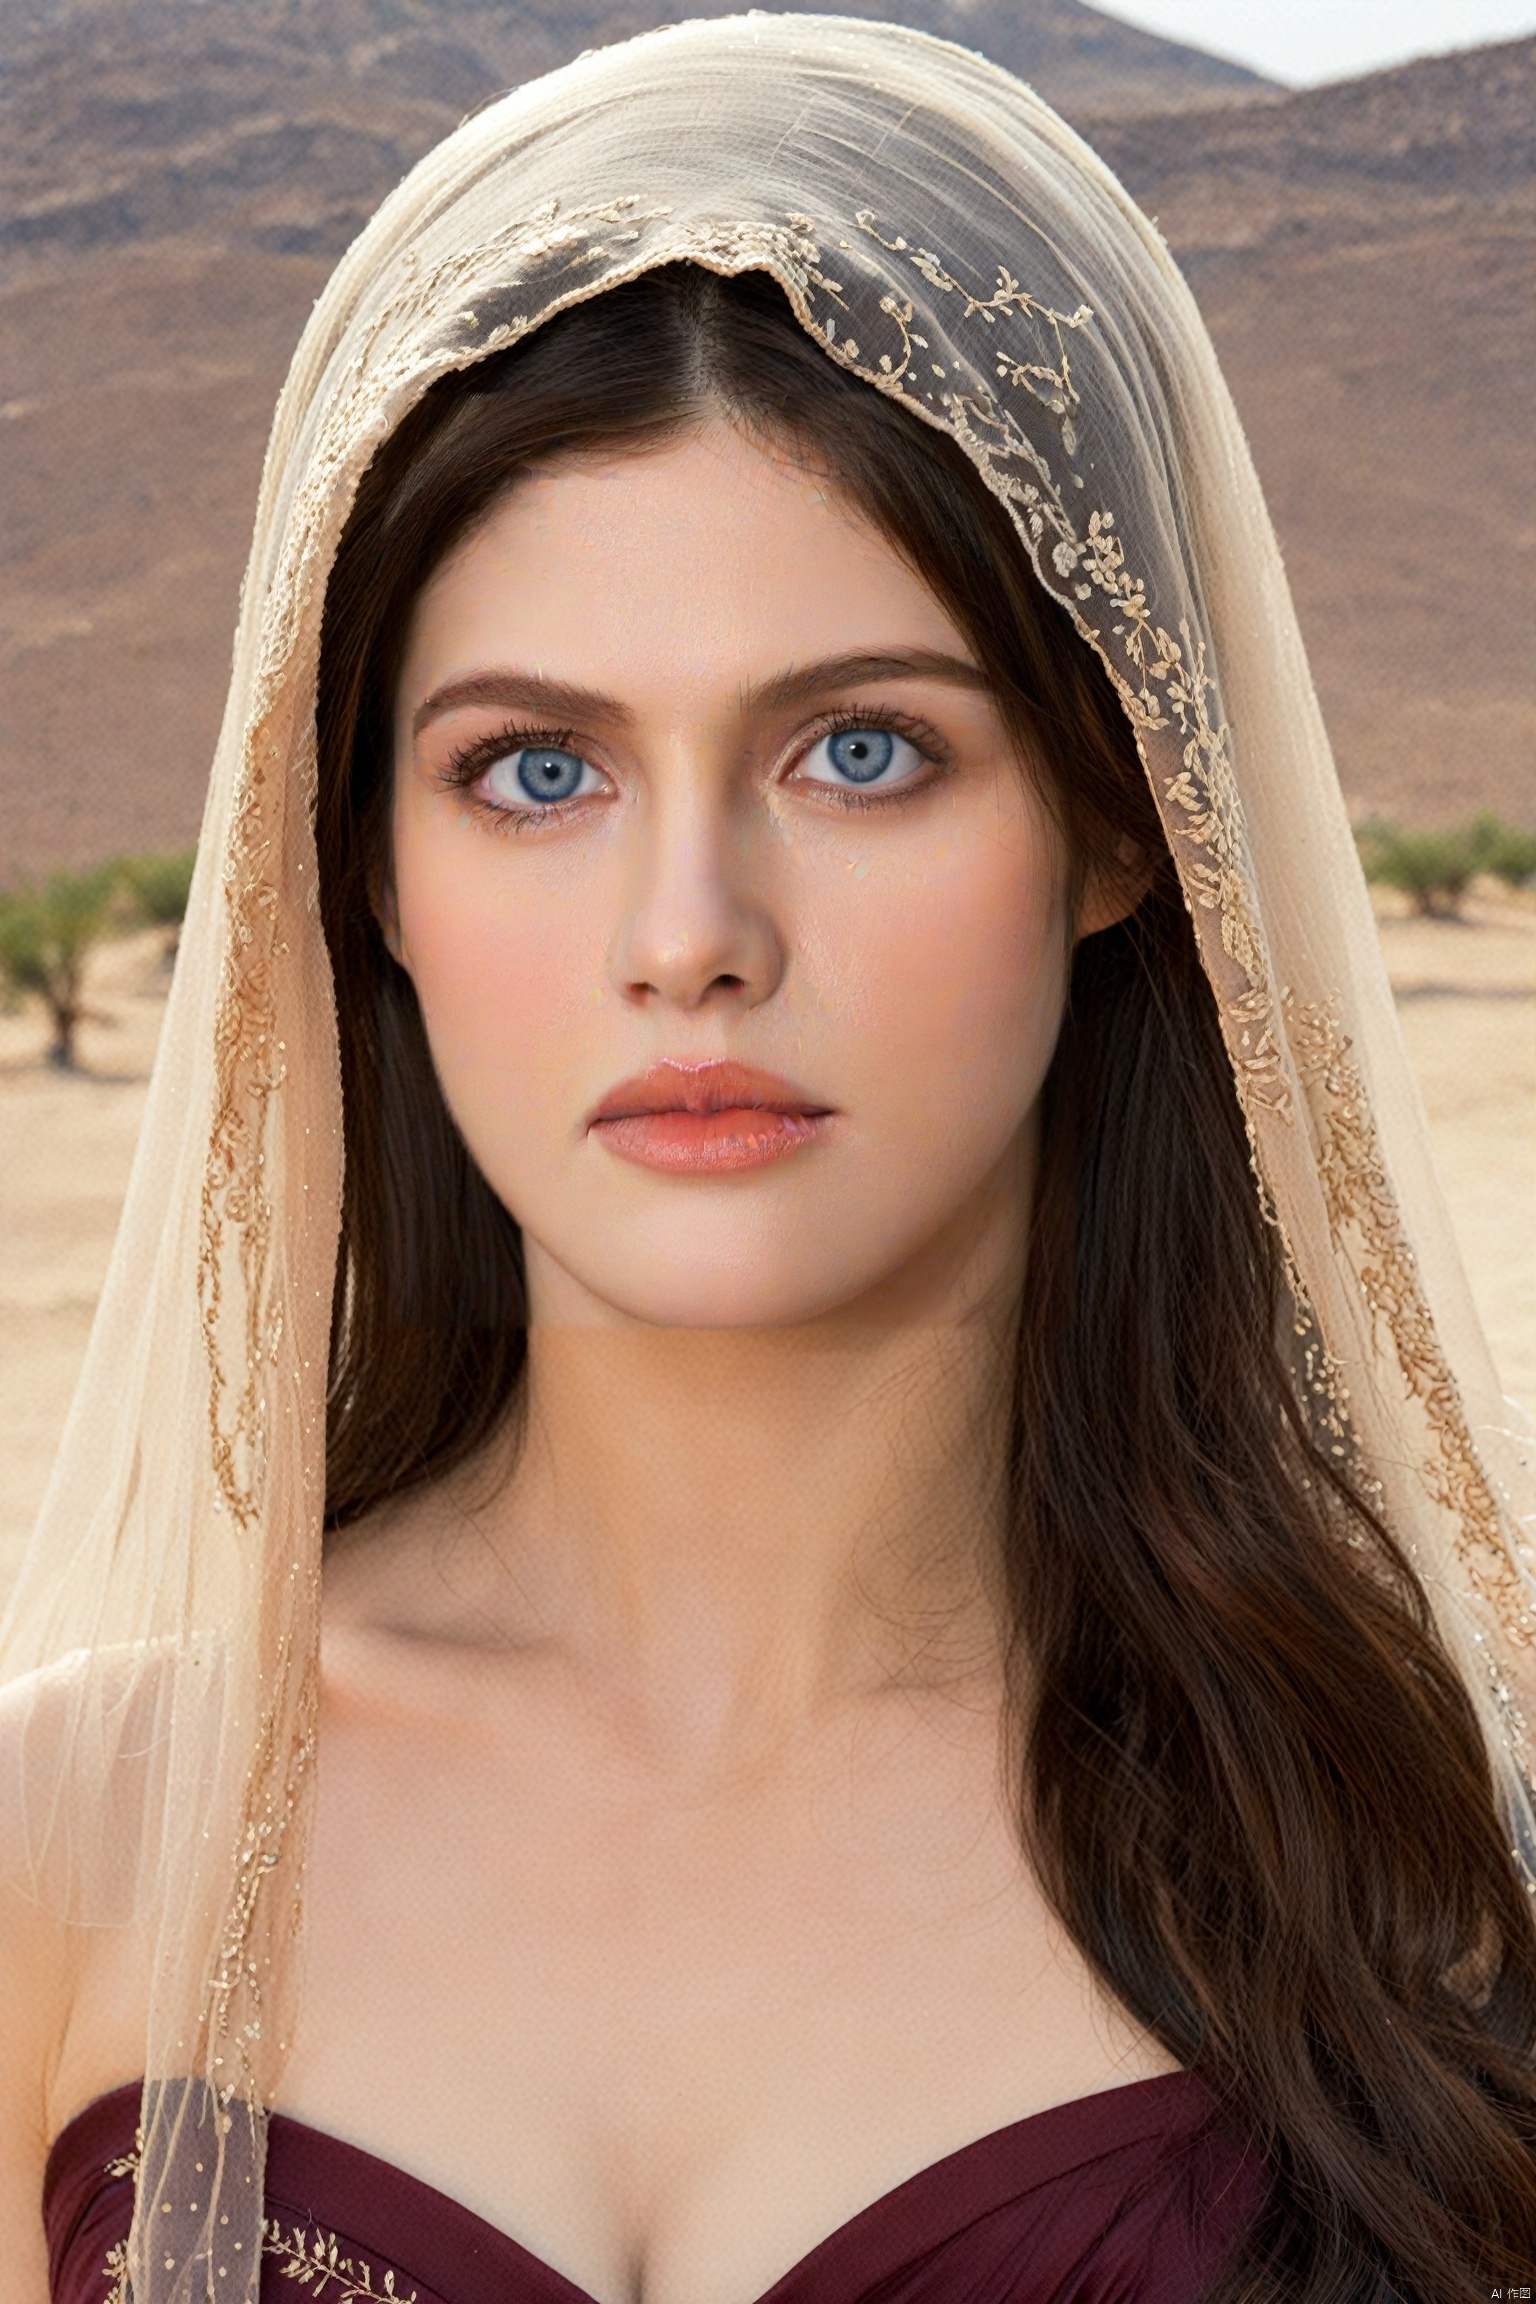 This image shows a close-up of an ethereal-looking young woman with long dark hair falling over her shoulders, blue eyes, her head adorned with a transparent scarf or veil, with the desert in the background, her The complexion was impeccable, with earthy tones on the lids and soft peach on the lips complementing the subtle makeup. She rests her face gently on her hands, exudes calm and poise, wears a burgundy embroidered gown, photo realistic, best quality, super high resolution, extremely detailed eyes and face, full body showing face audience,Alexandra Daddario